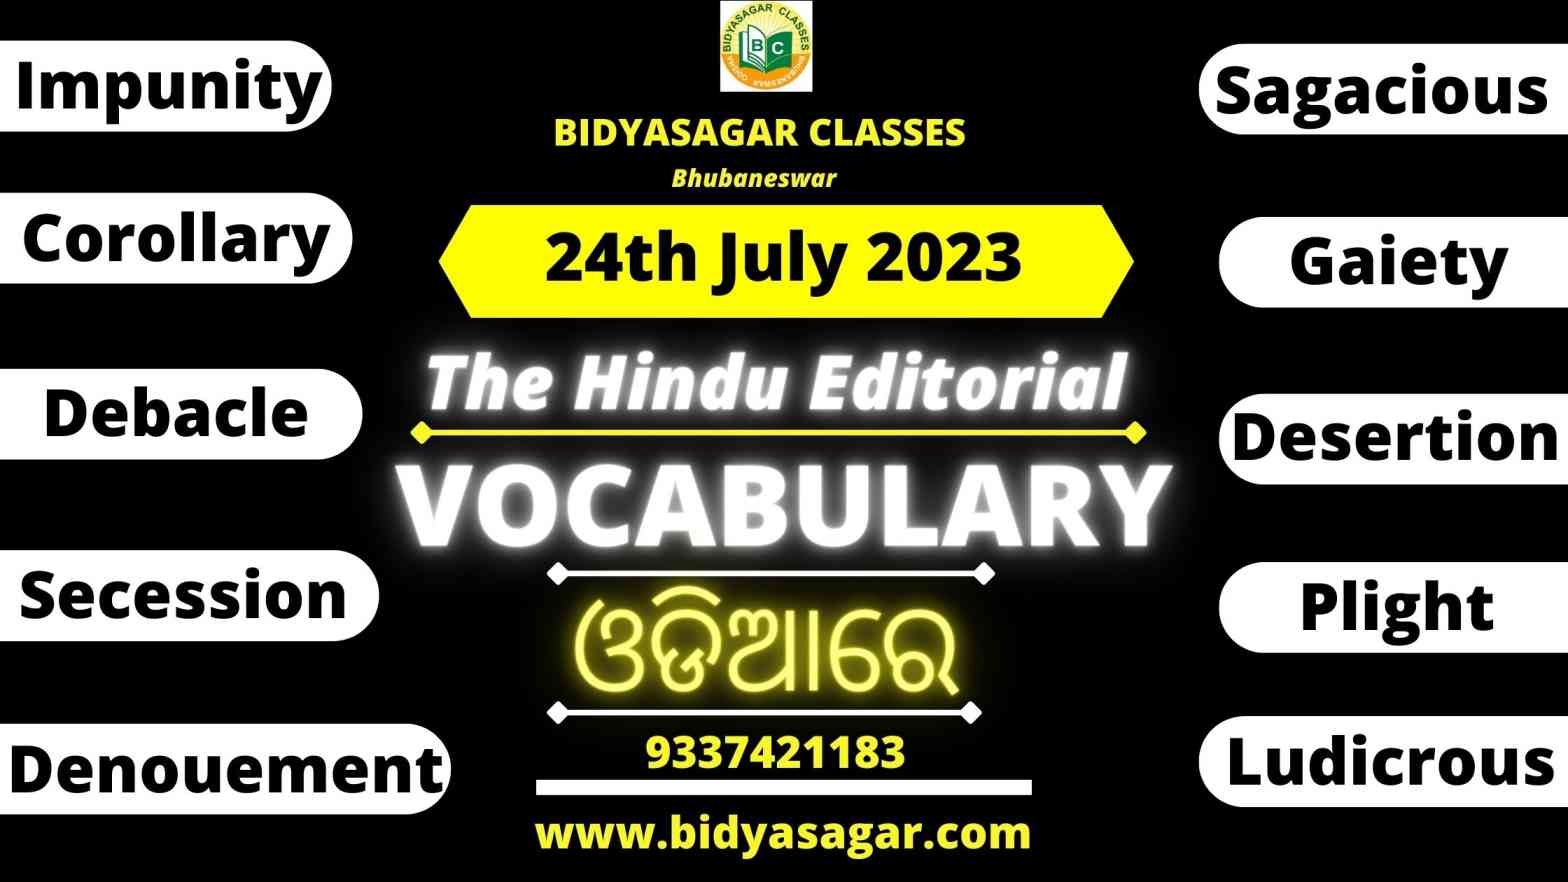 The Hindu Editorial Vocabulary of 24th July 2023